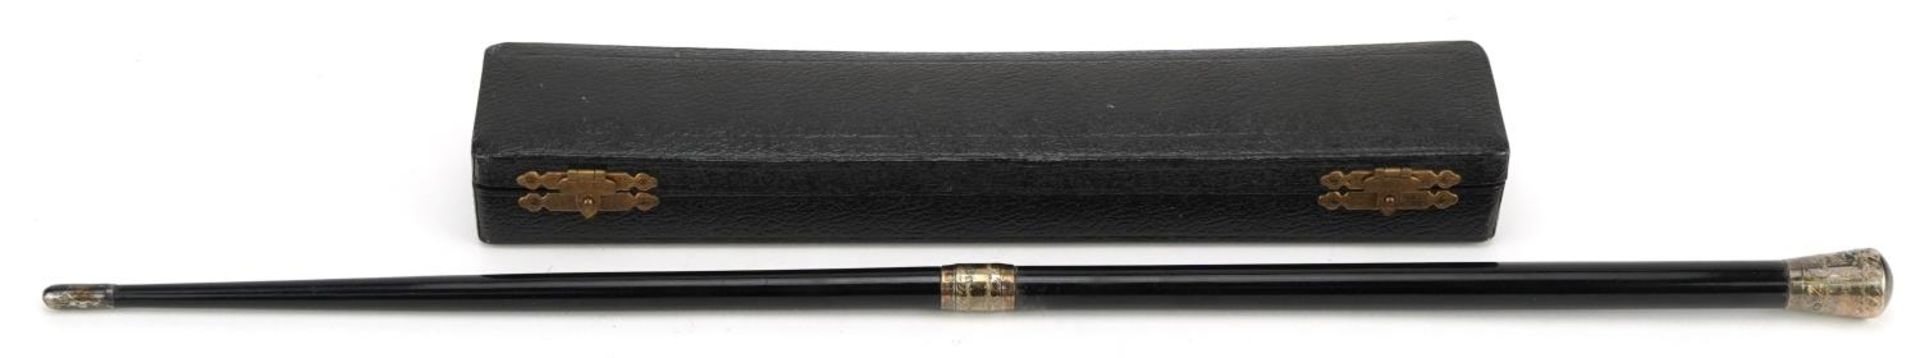 Early 20th century ebonised conductor's baton with engraved silver mounts housed in a velvet and